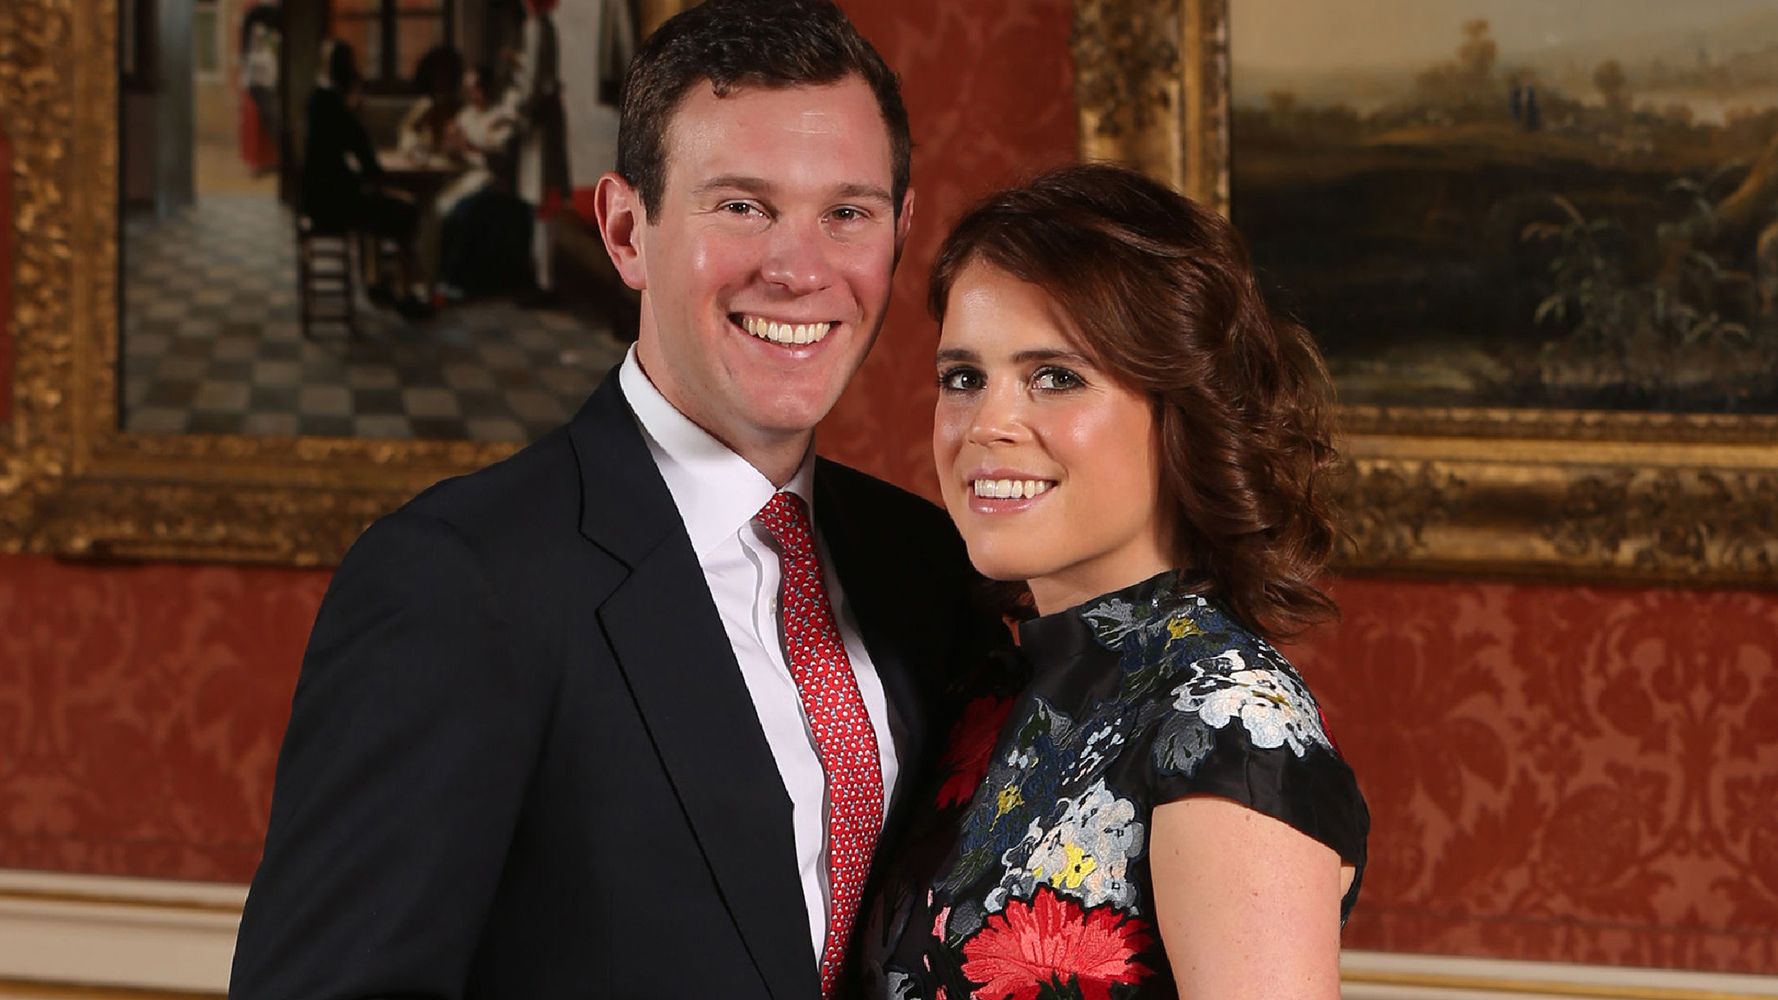 The public can attend Princess Eugenie's wedding